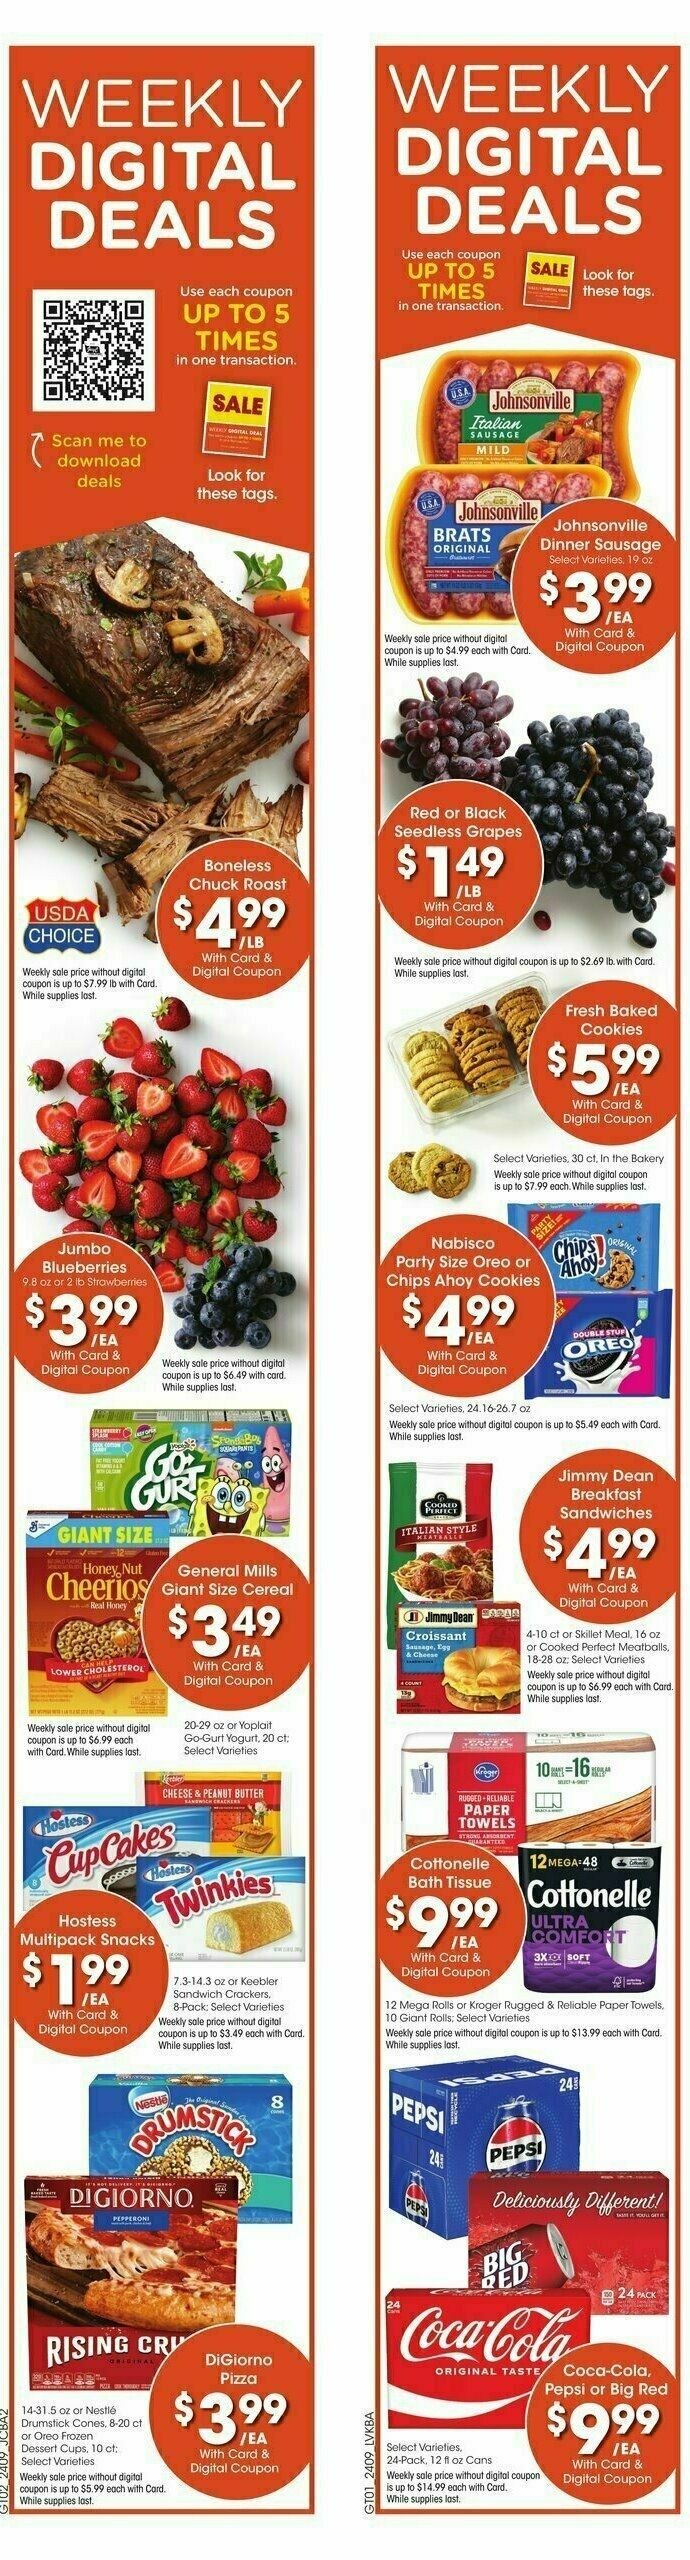 Jay C Food Weekly Ad from April 3